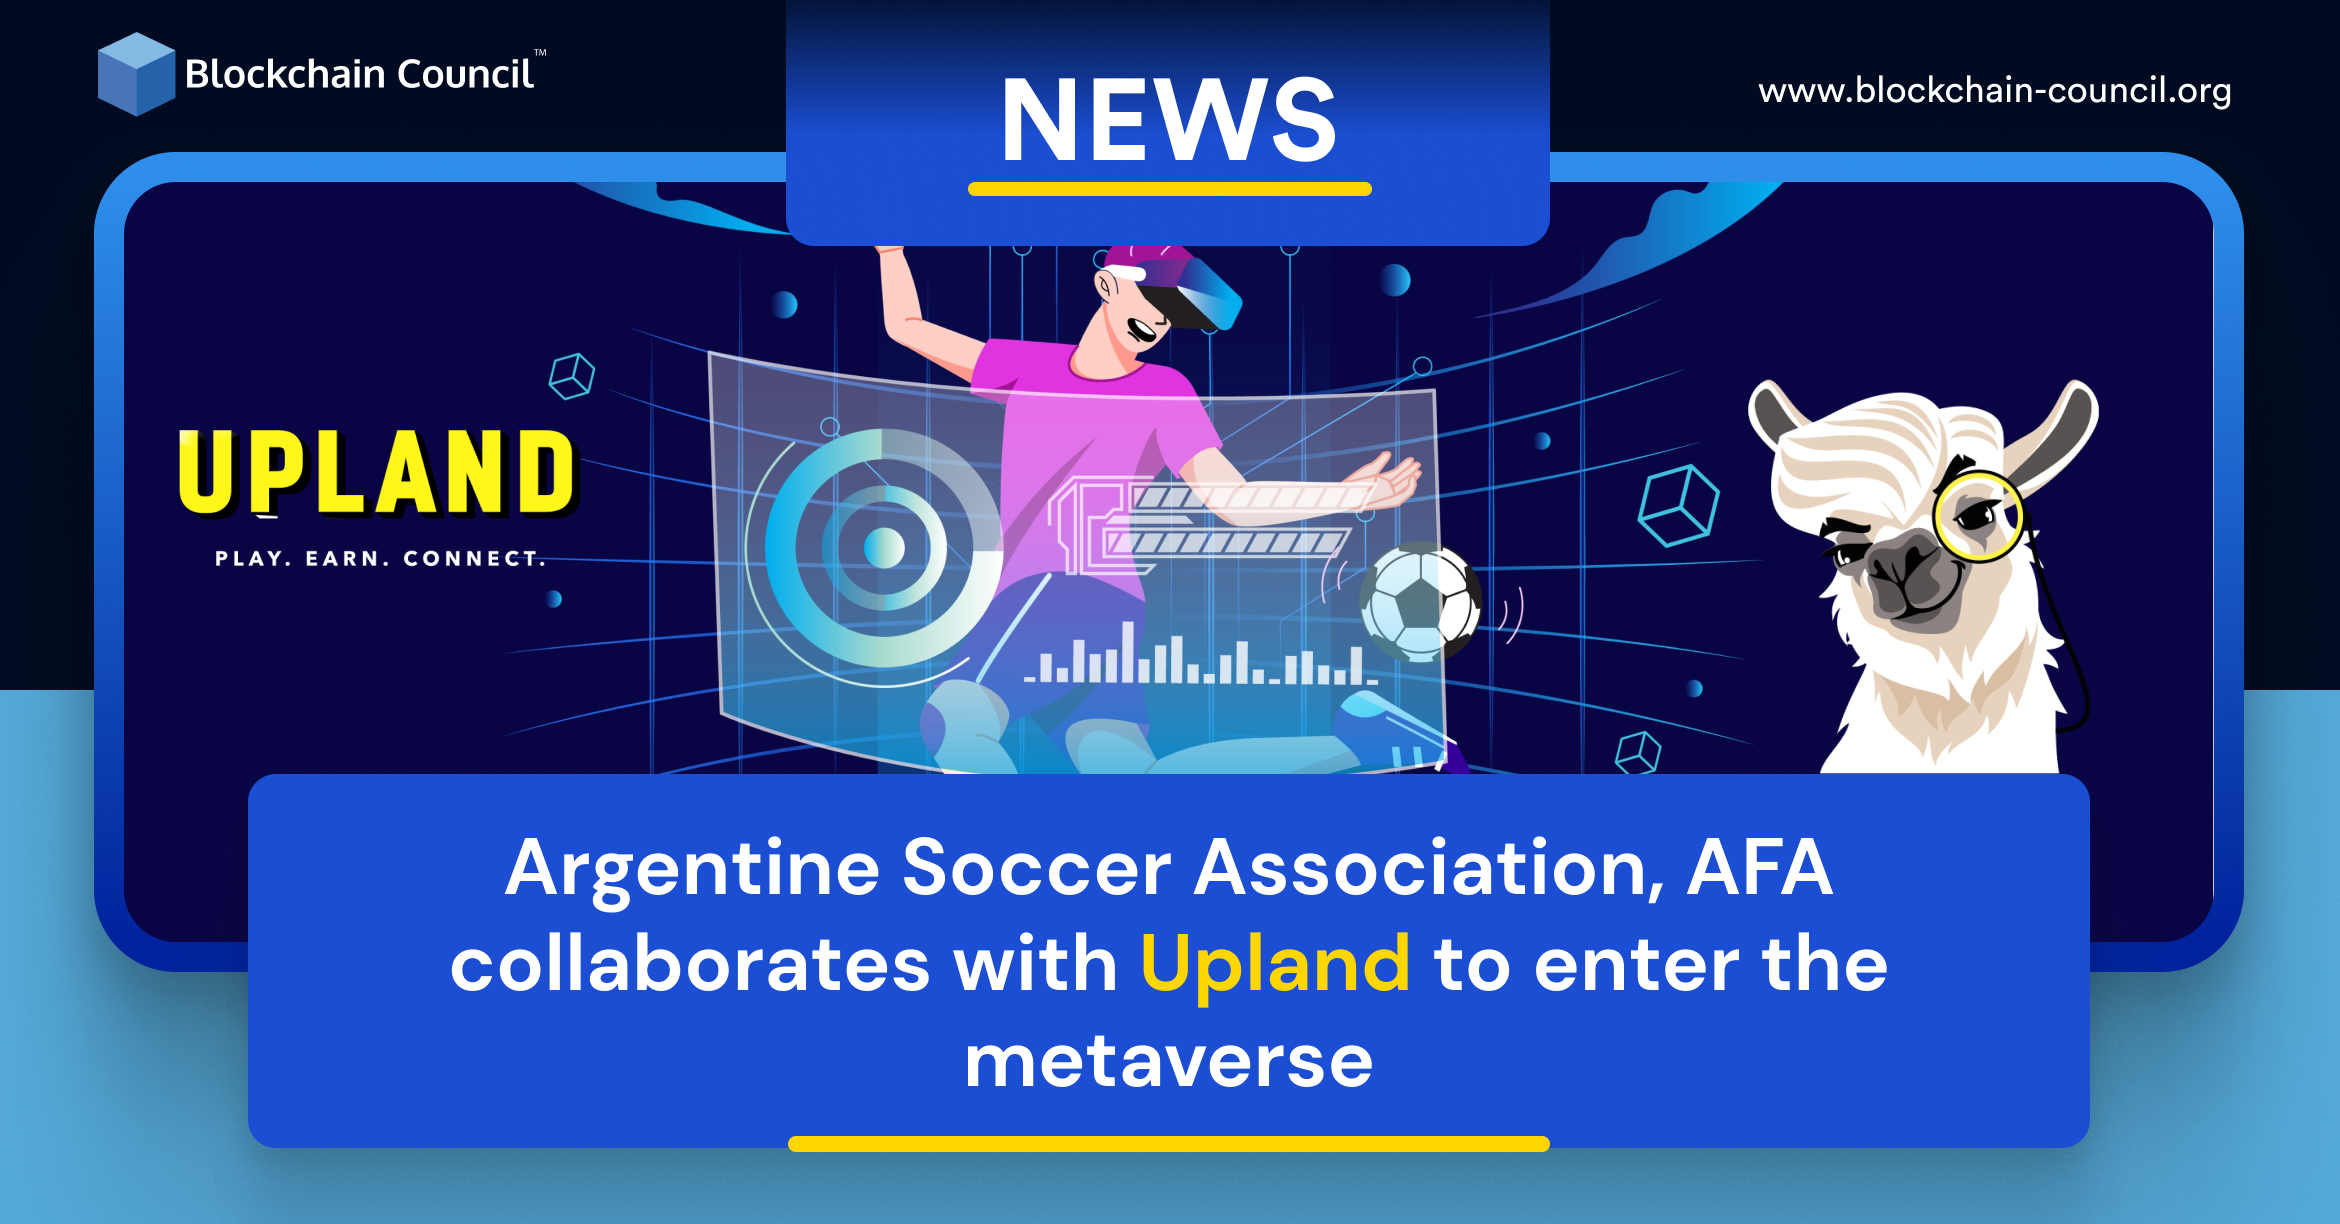 Argentine Soccer Association, AFA collaborates with Upland to enter the metaverse